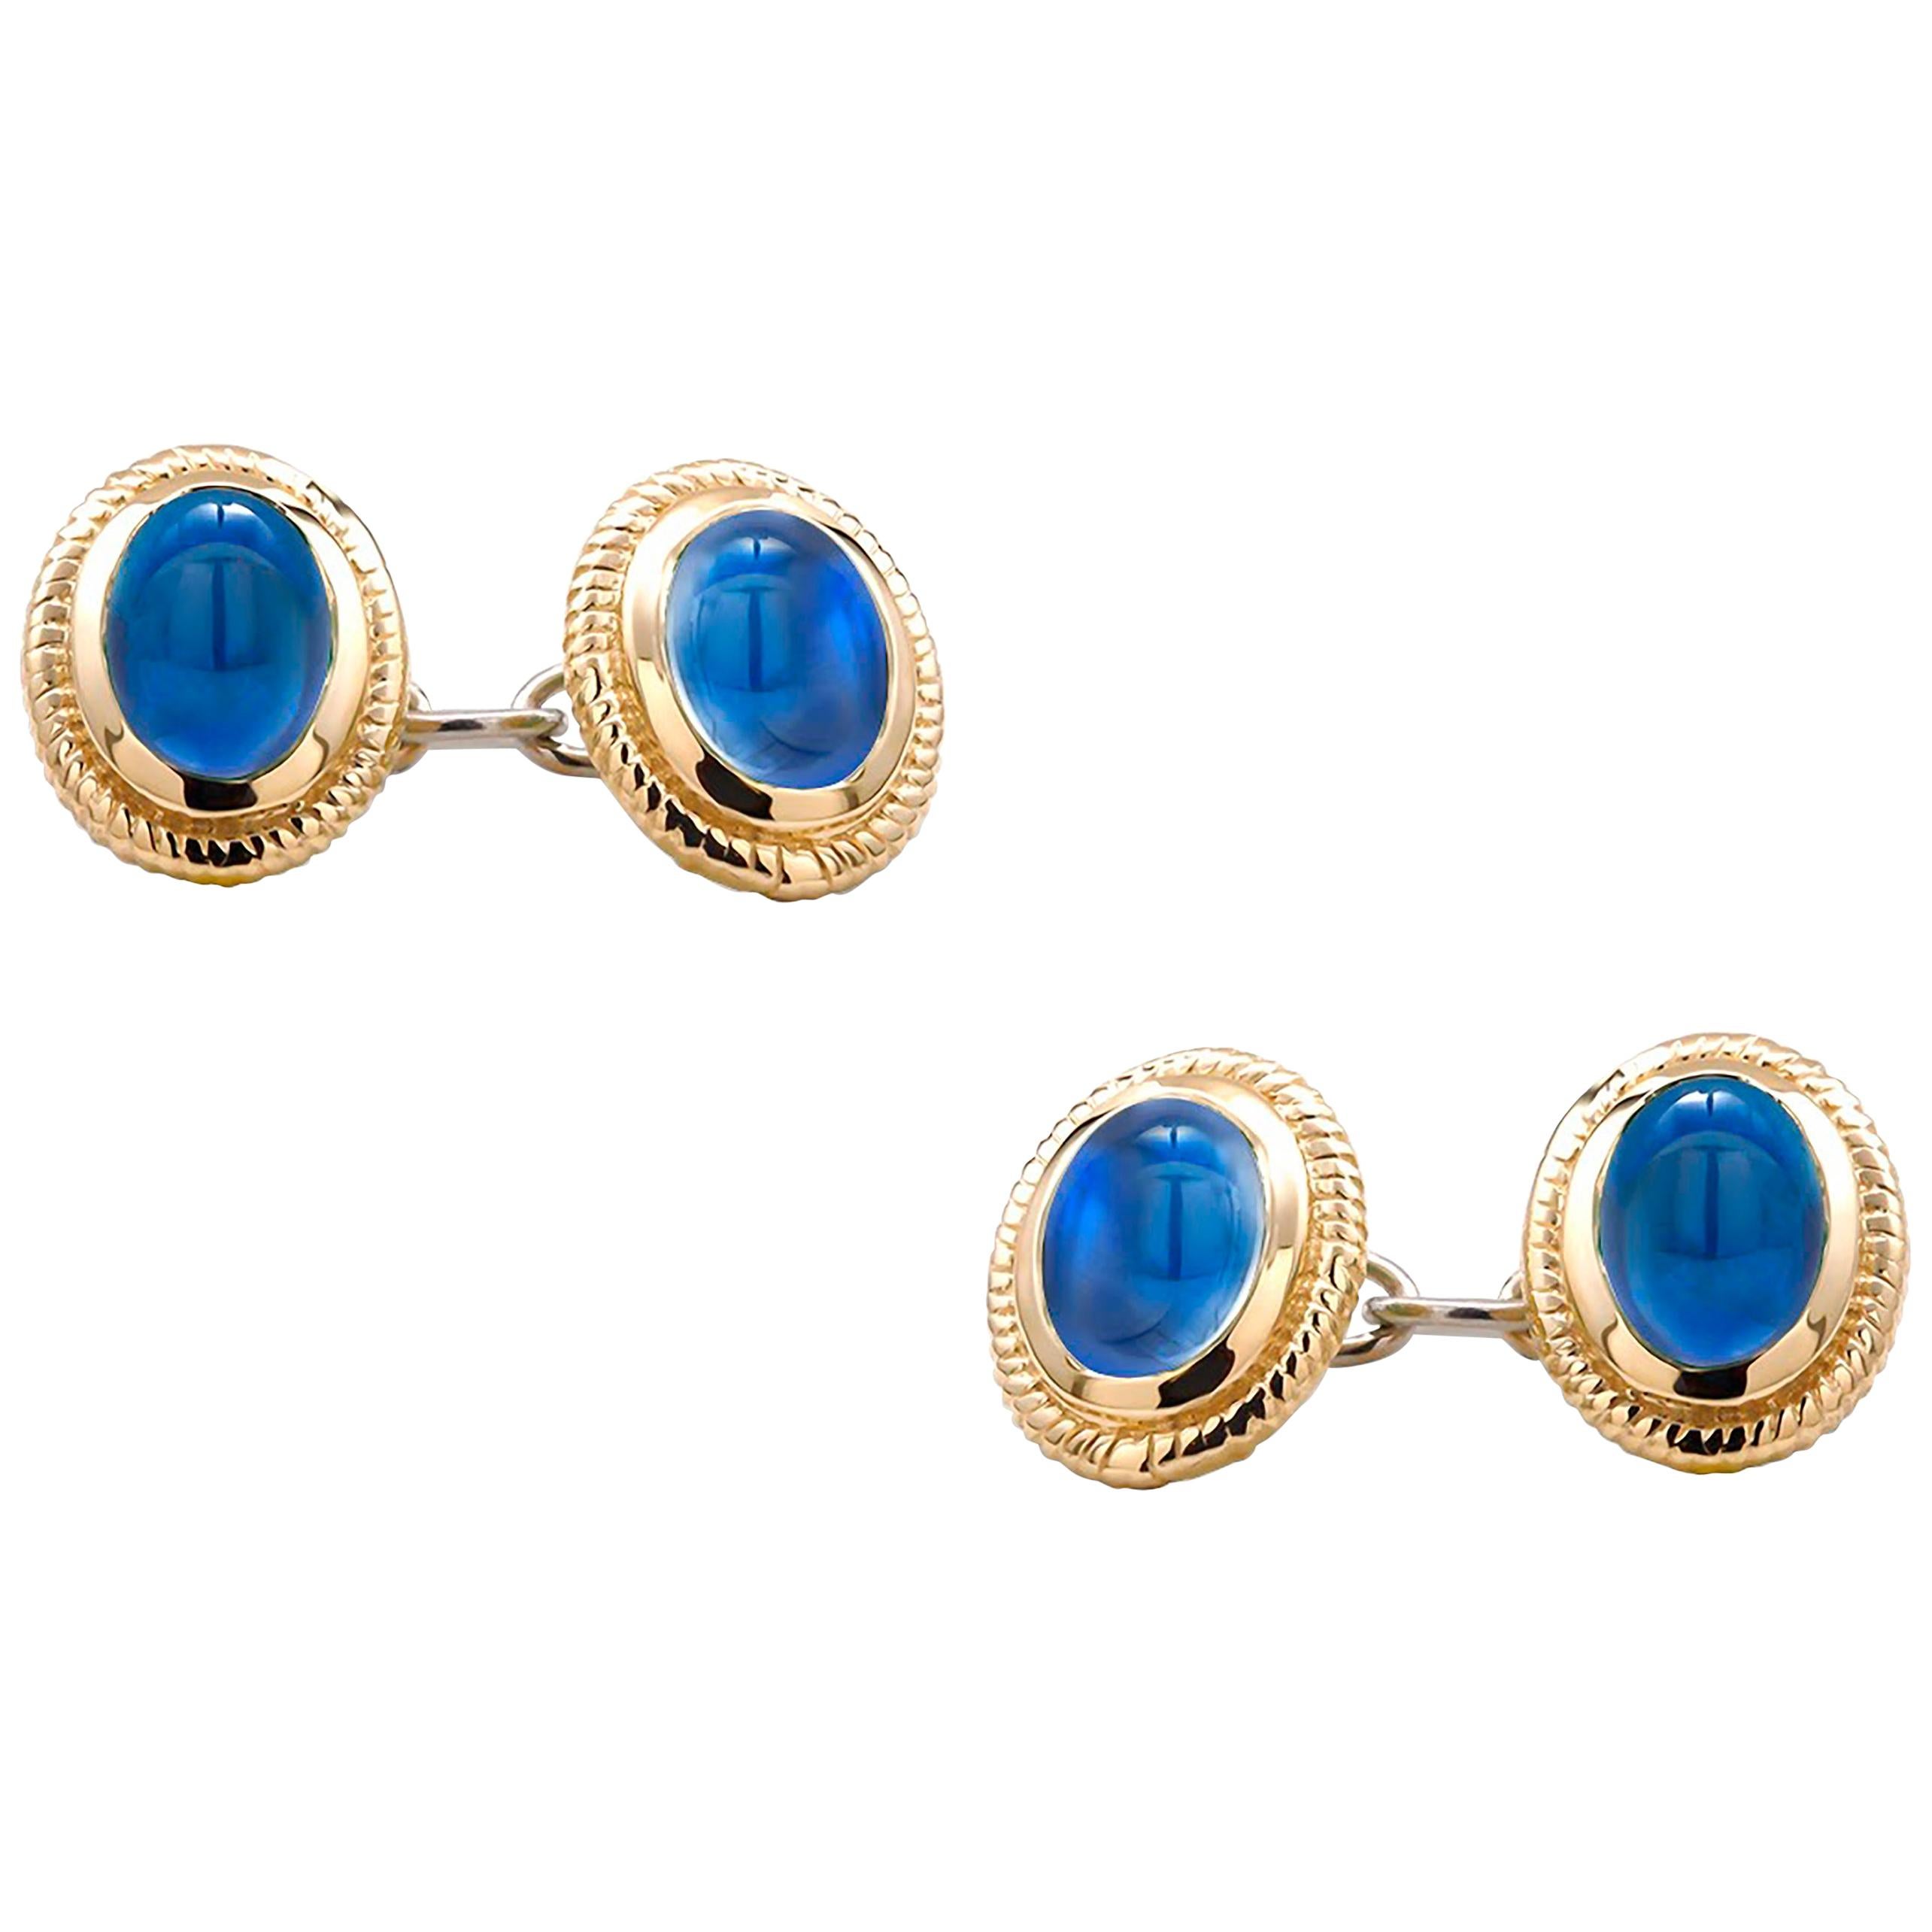 Modern Matching Pair of Cabochon Sapphire Double Sides Chain Link Cufflinks